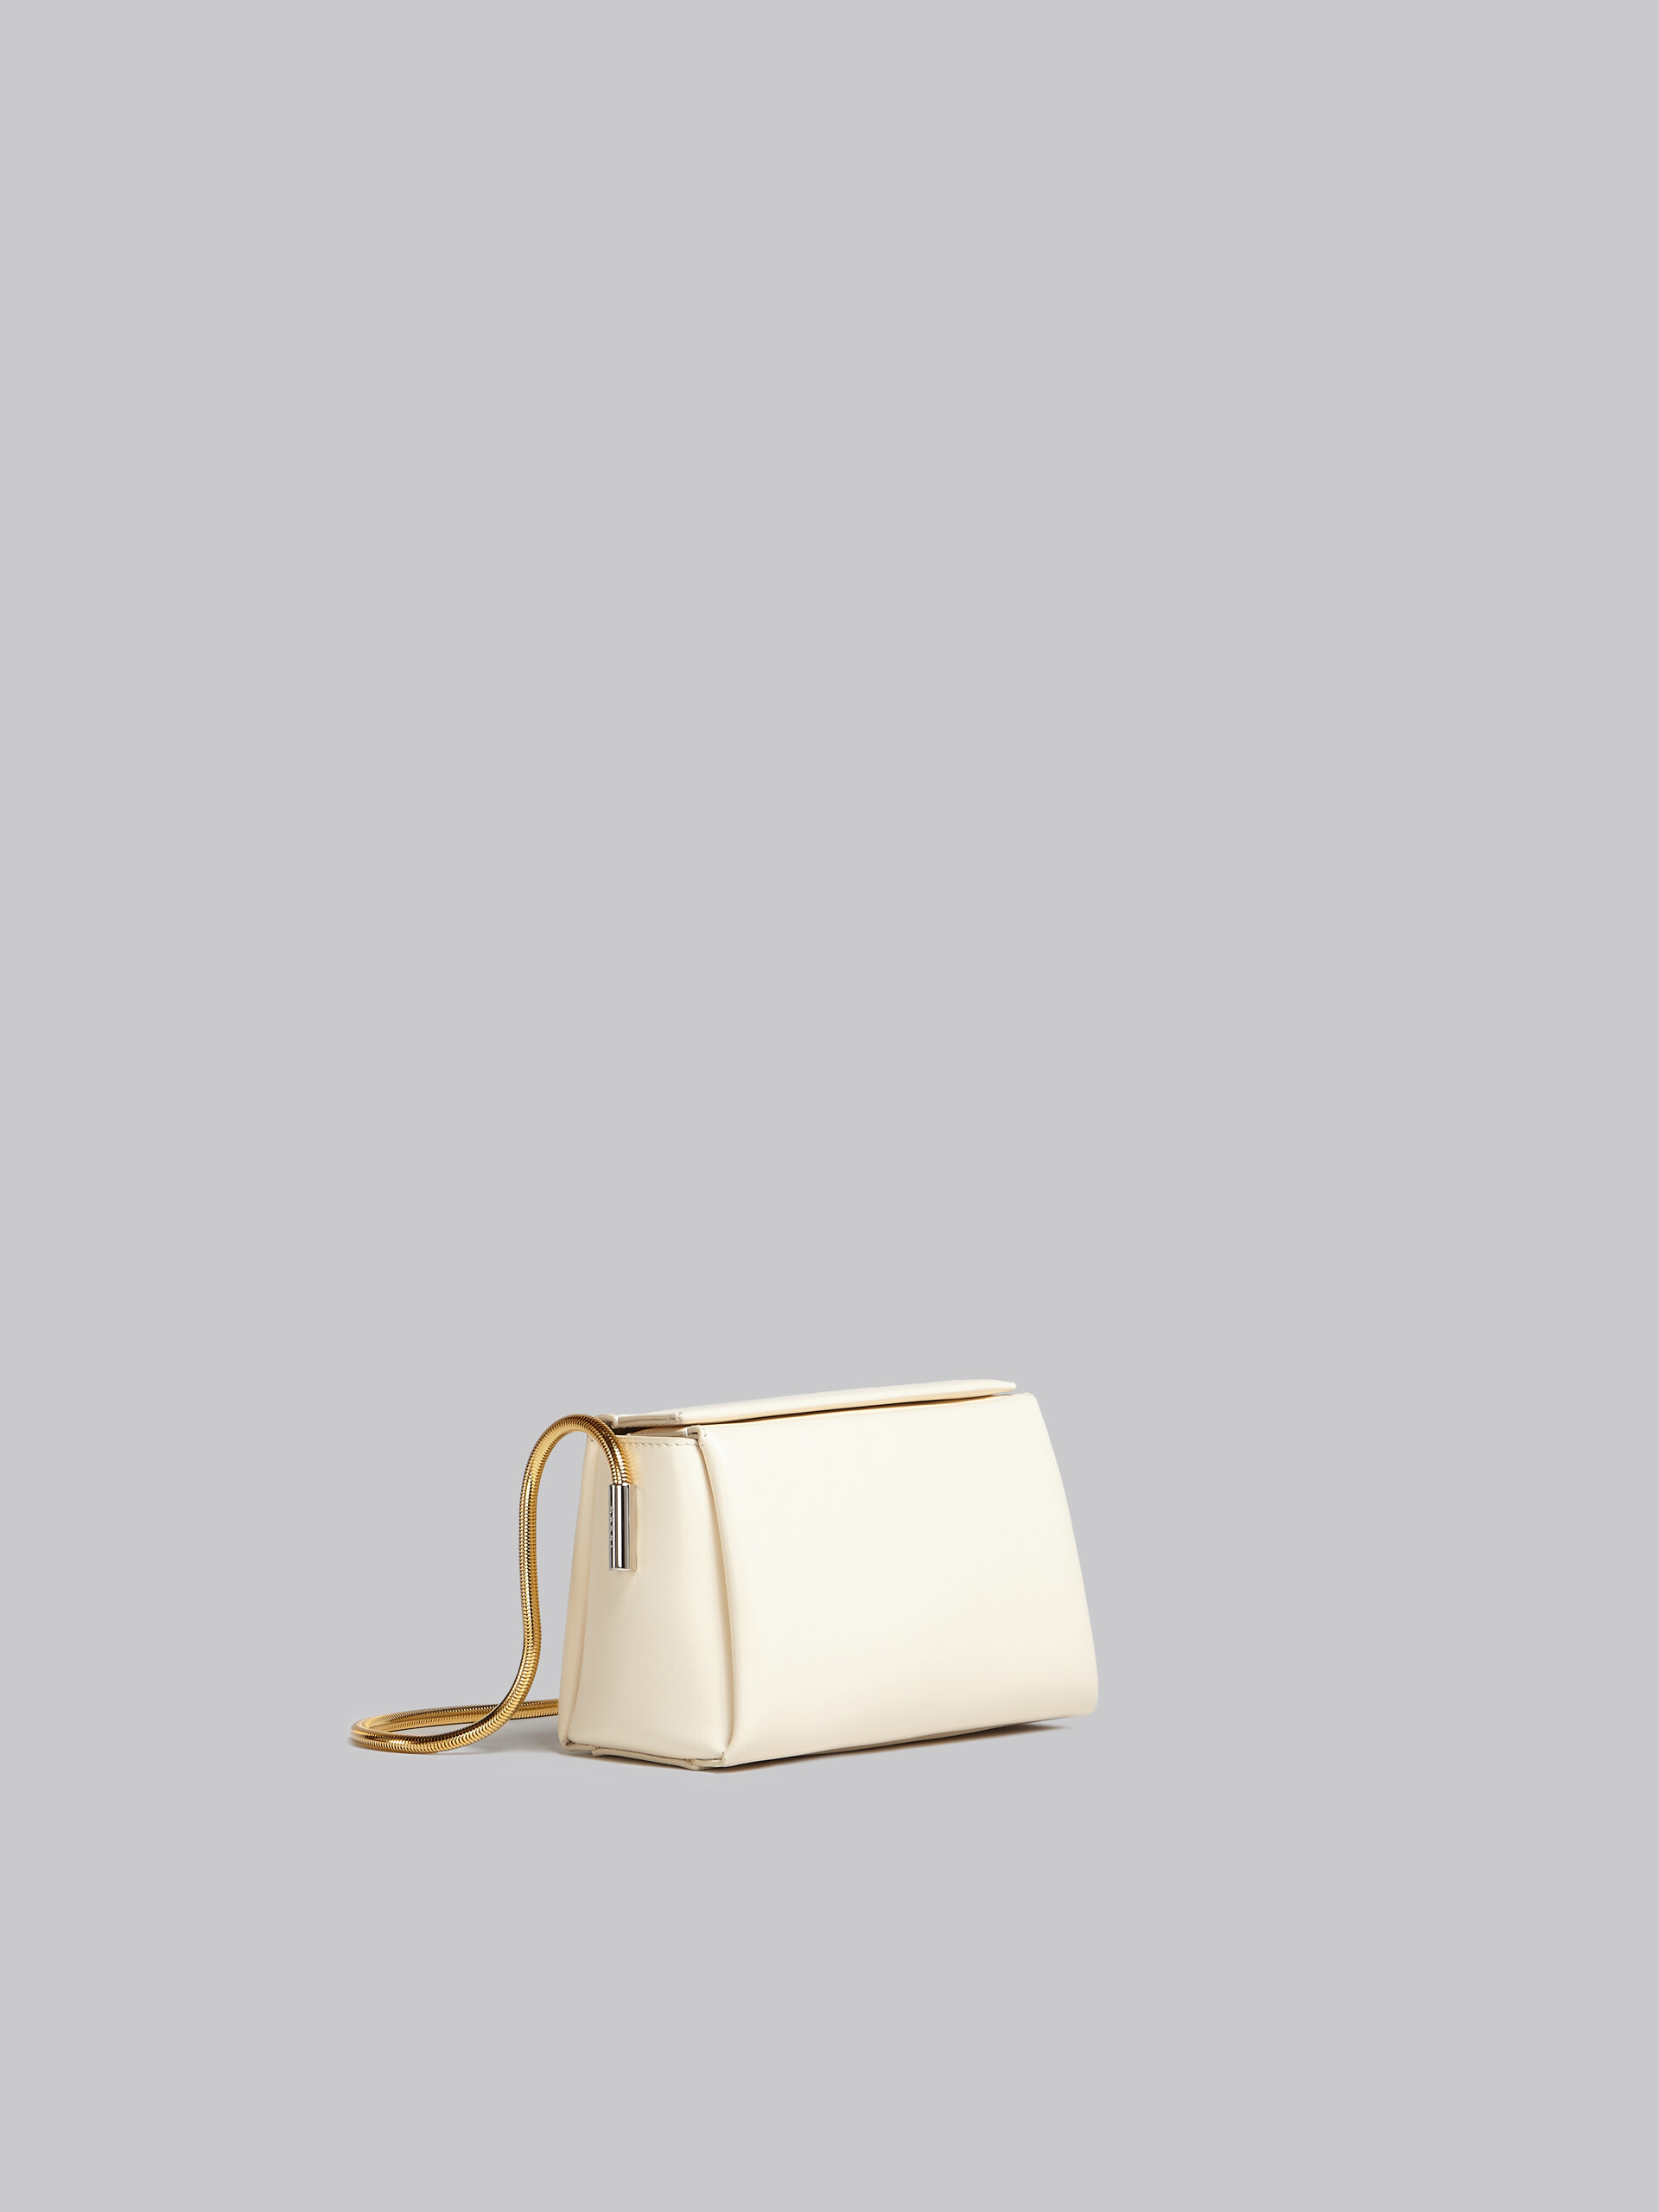 Toggle Small Bag in ivory white leather - Shoulder Bag - Image 5